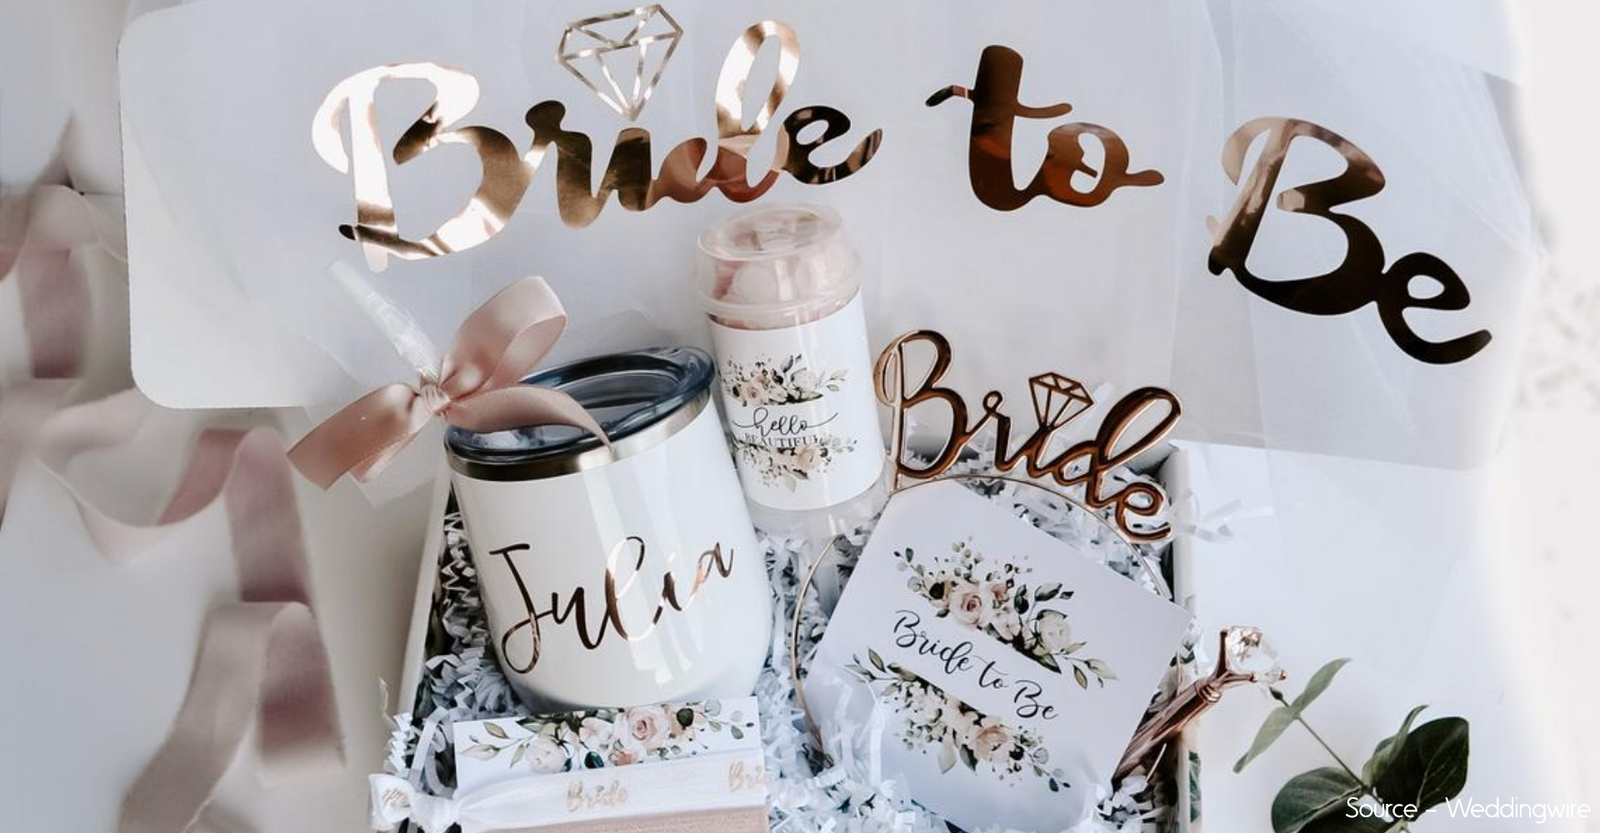 Thoughtful Bride-To-Be Gift Ideas That She Will Love